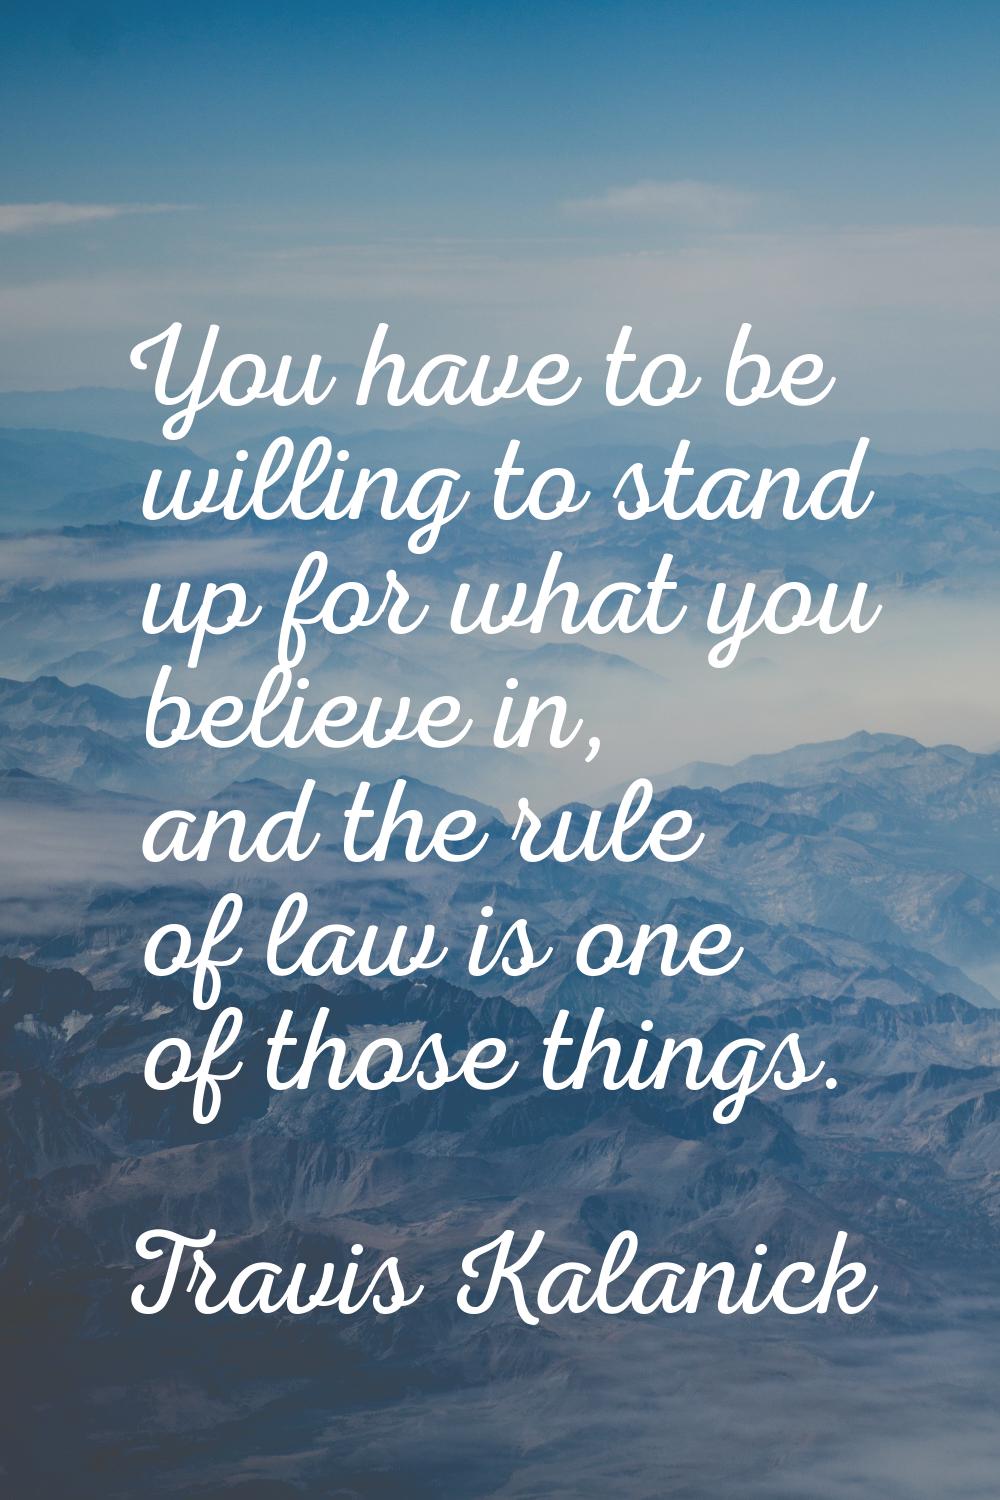 You have to be willing to stand up for what you believe in, and the rule of law is one of those thi